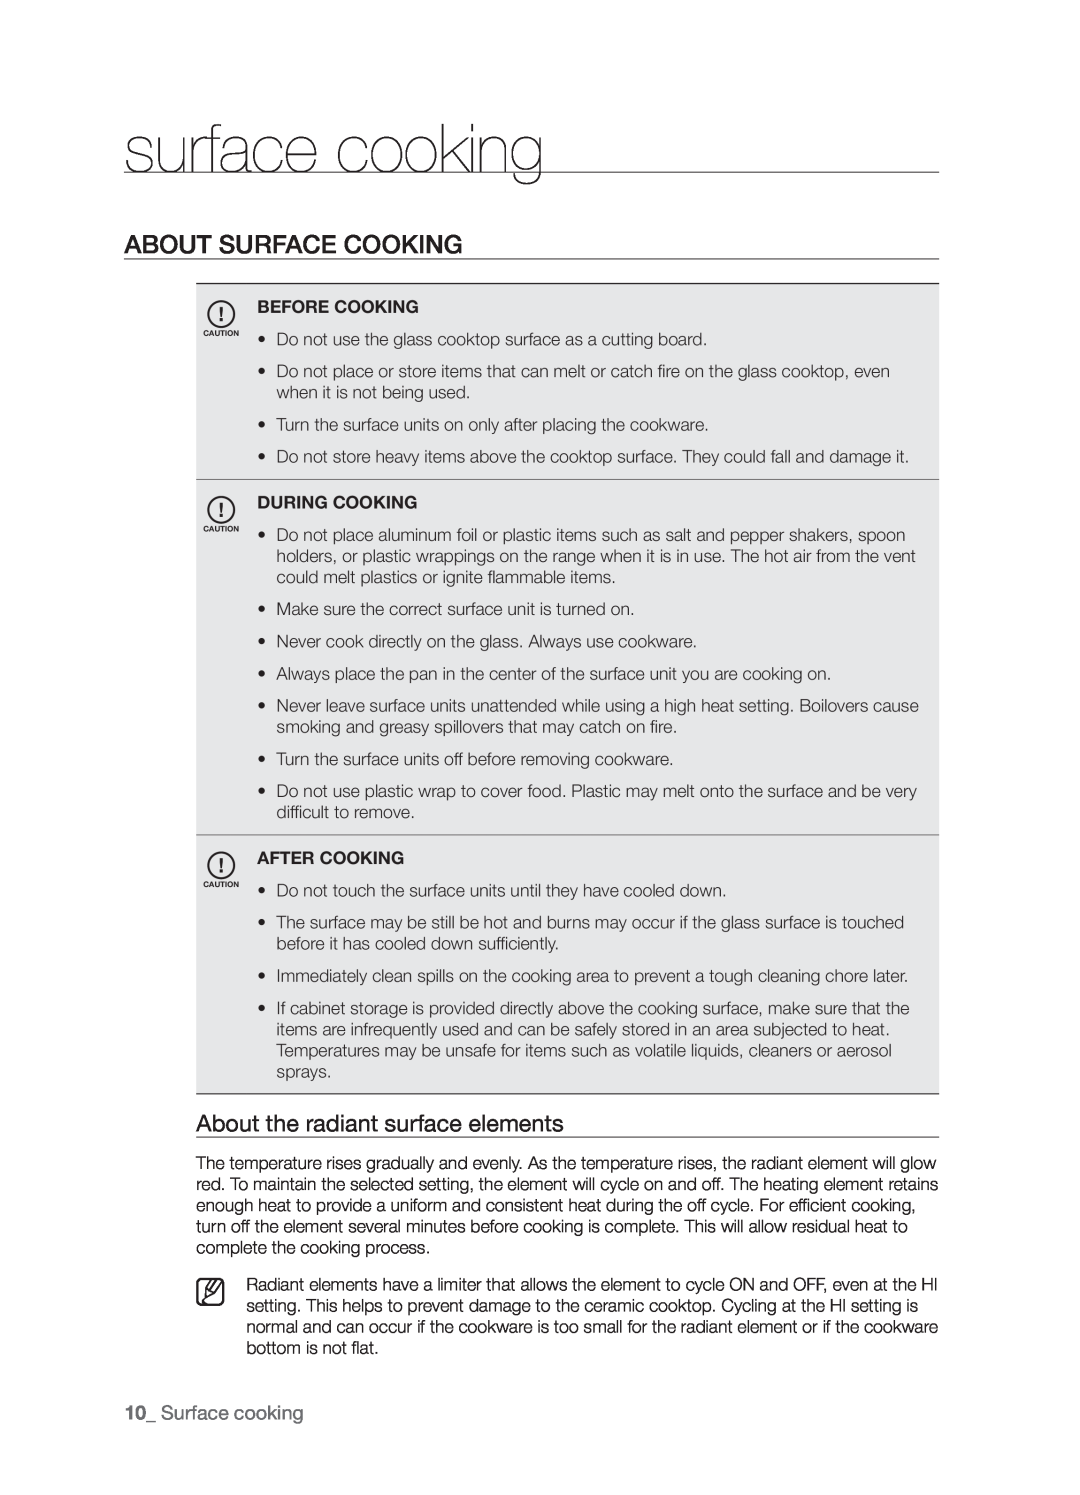 Samsung FTQ386LWX user manual About surface cooking, About the radiant surface elements, 10_ Surface cooking 